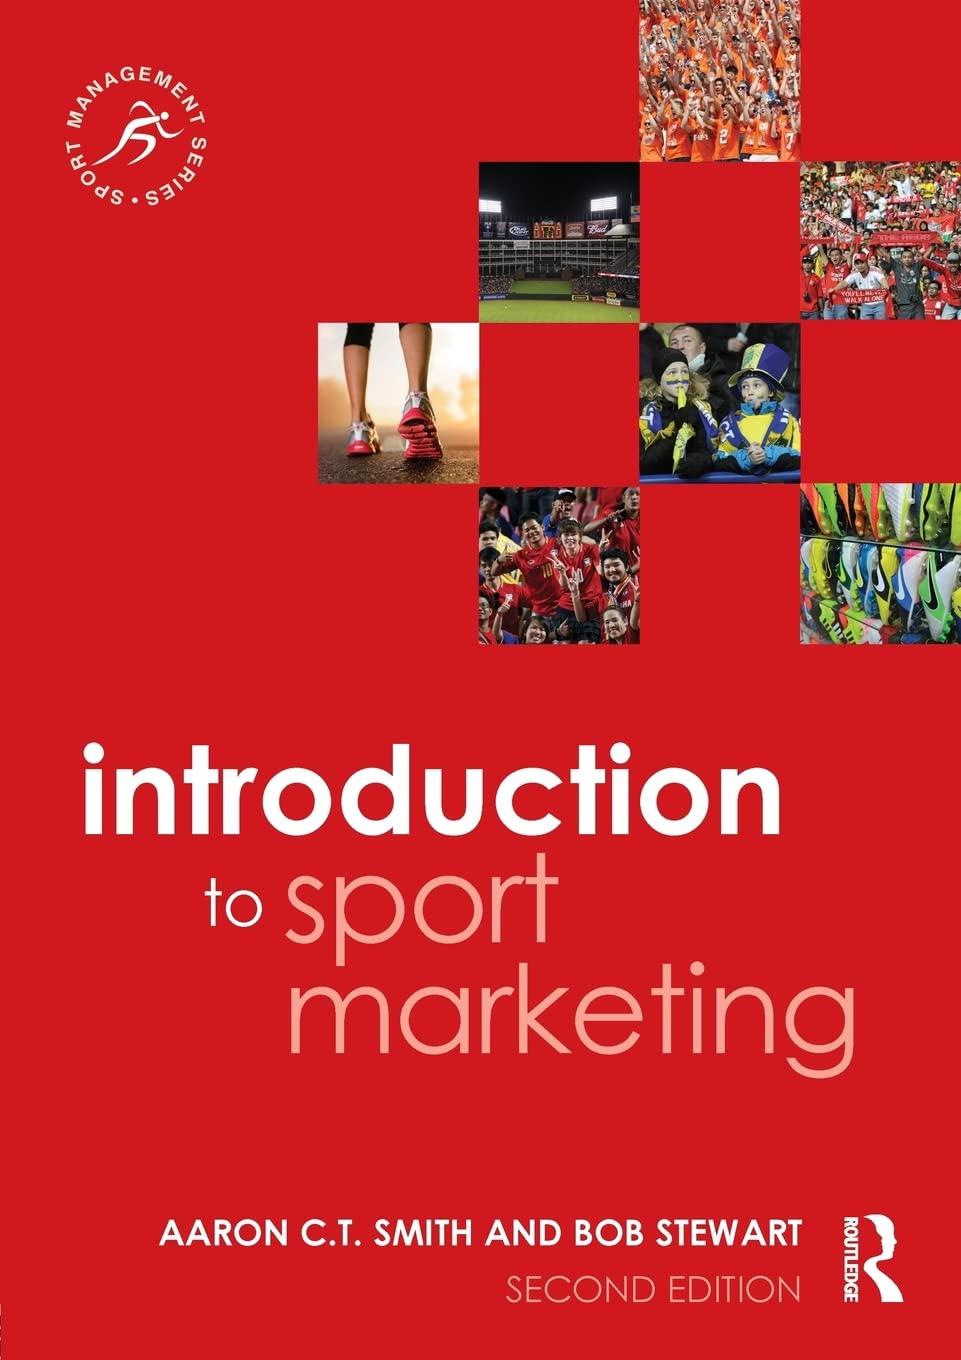 introduction to sport marketing 2nd edition aaron c.t. smith, bob stewart 1138022969, 9781138022966